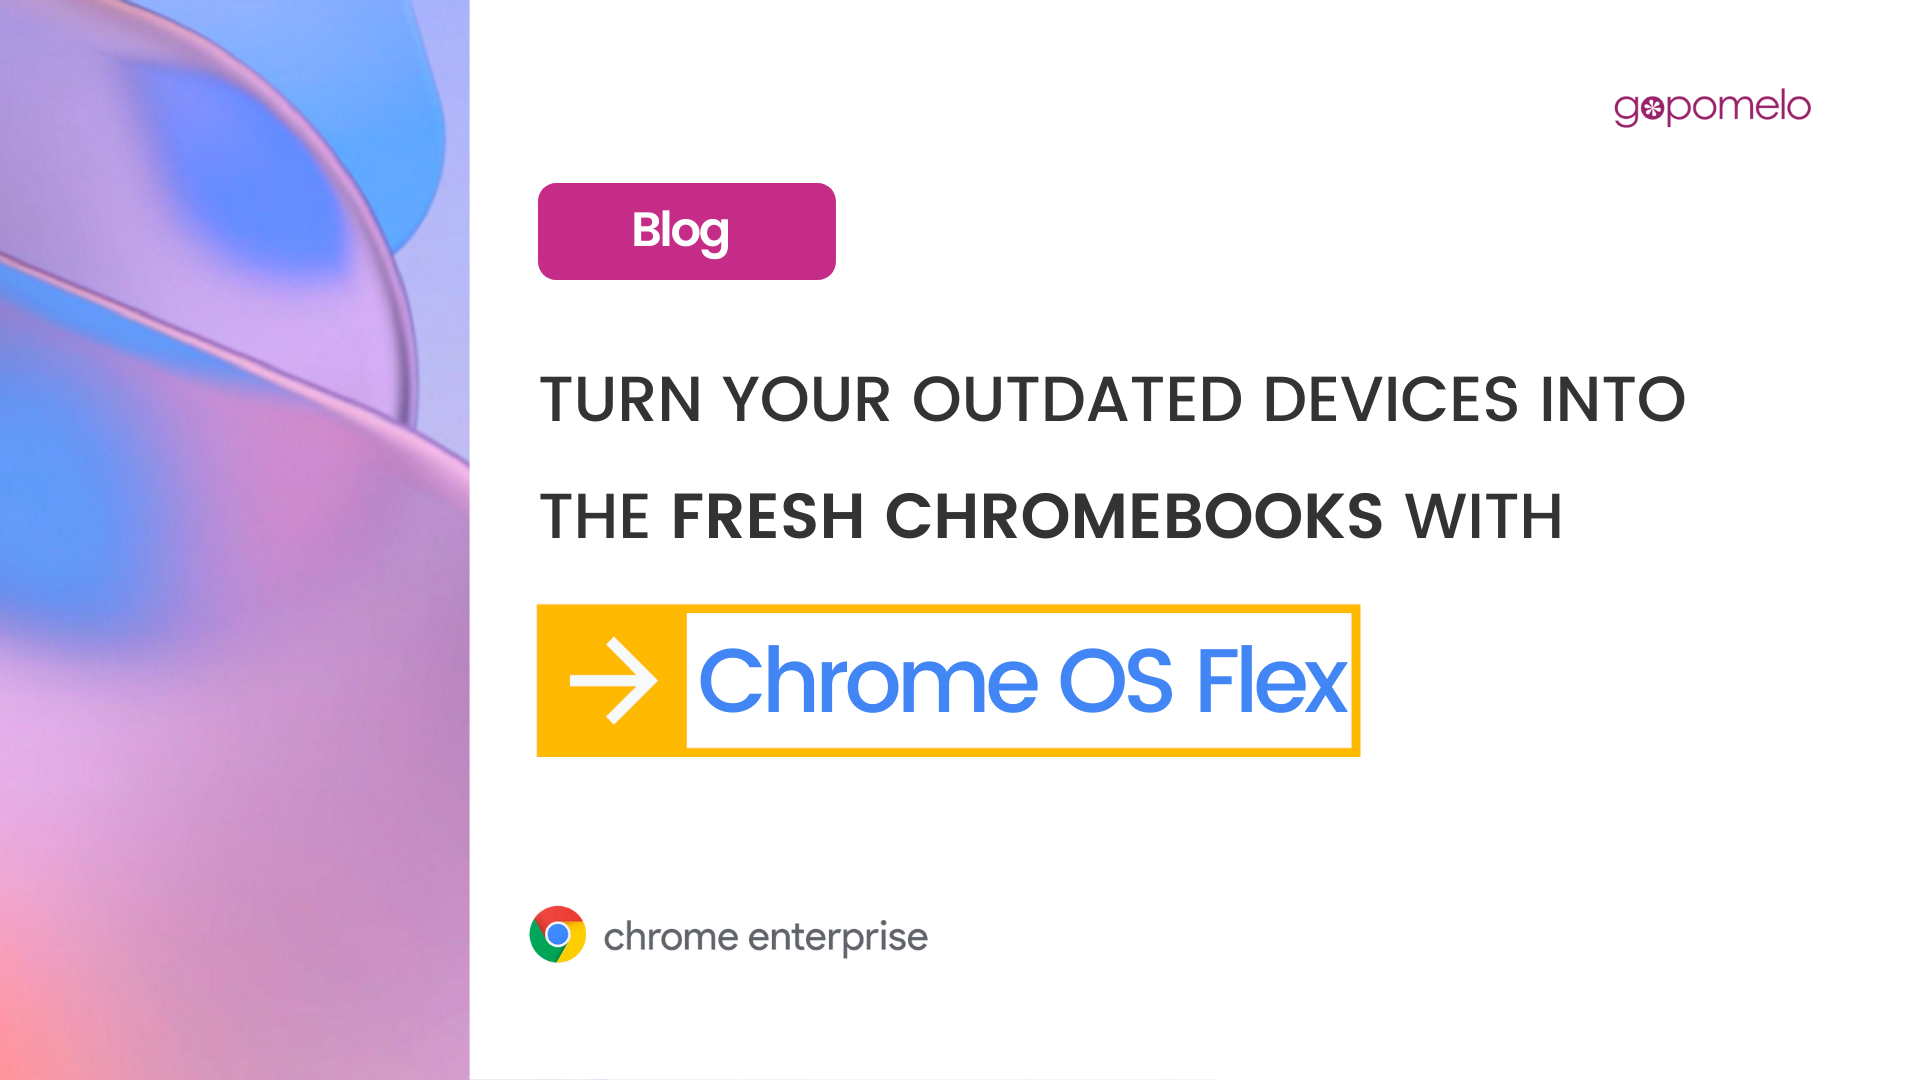 Turn your outdated devices into the fresh Chromebooks with Chrome OS Flex